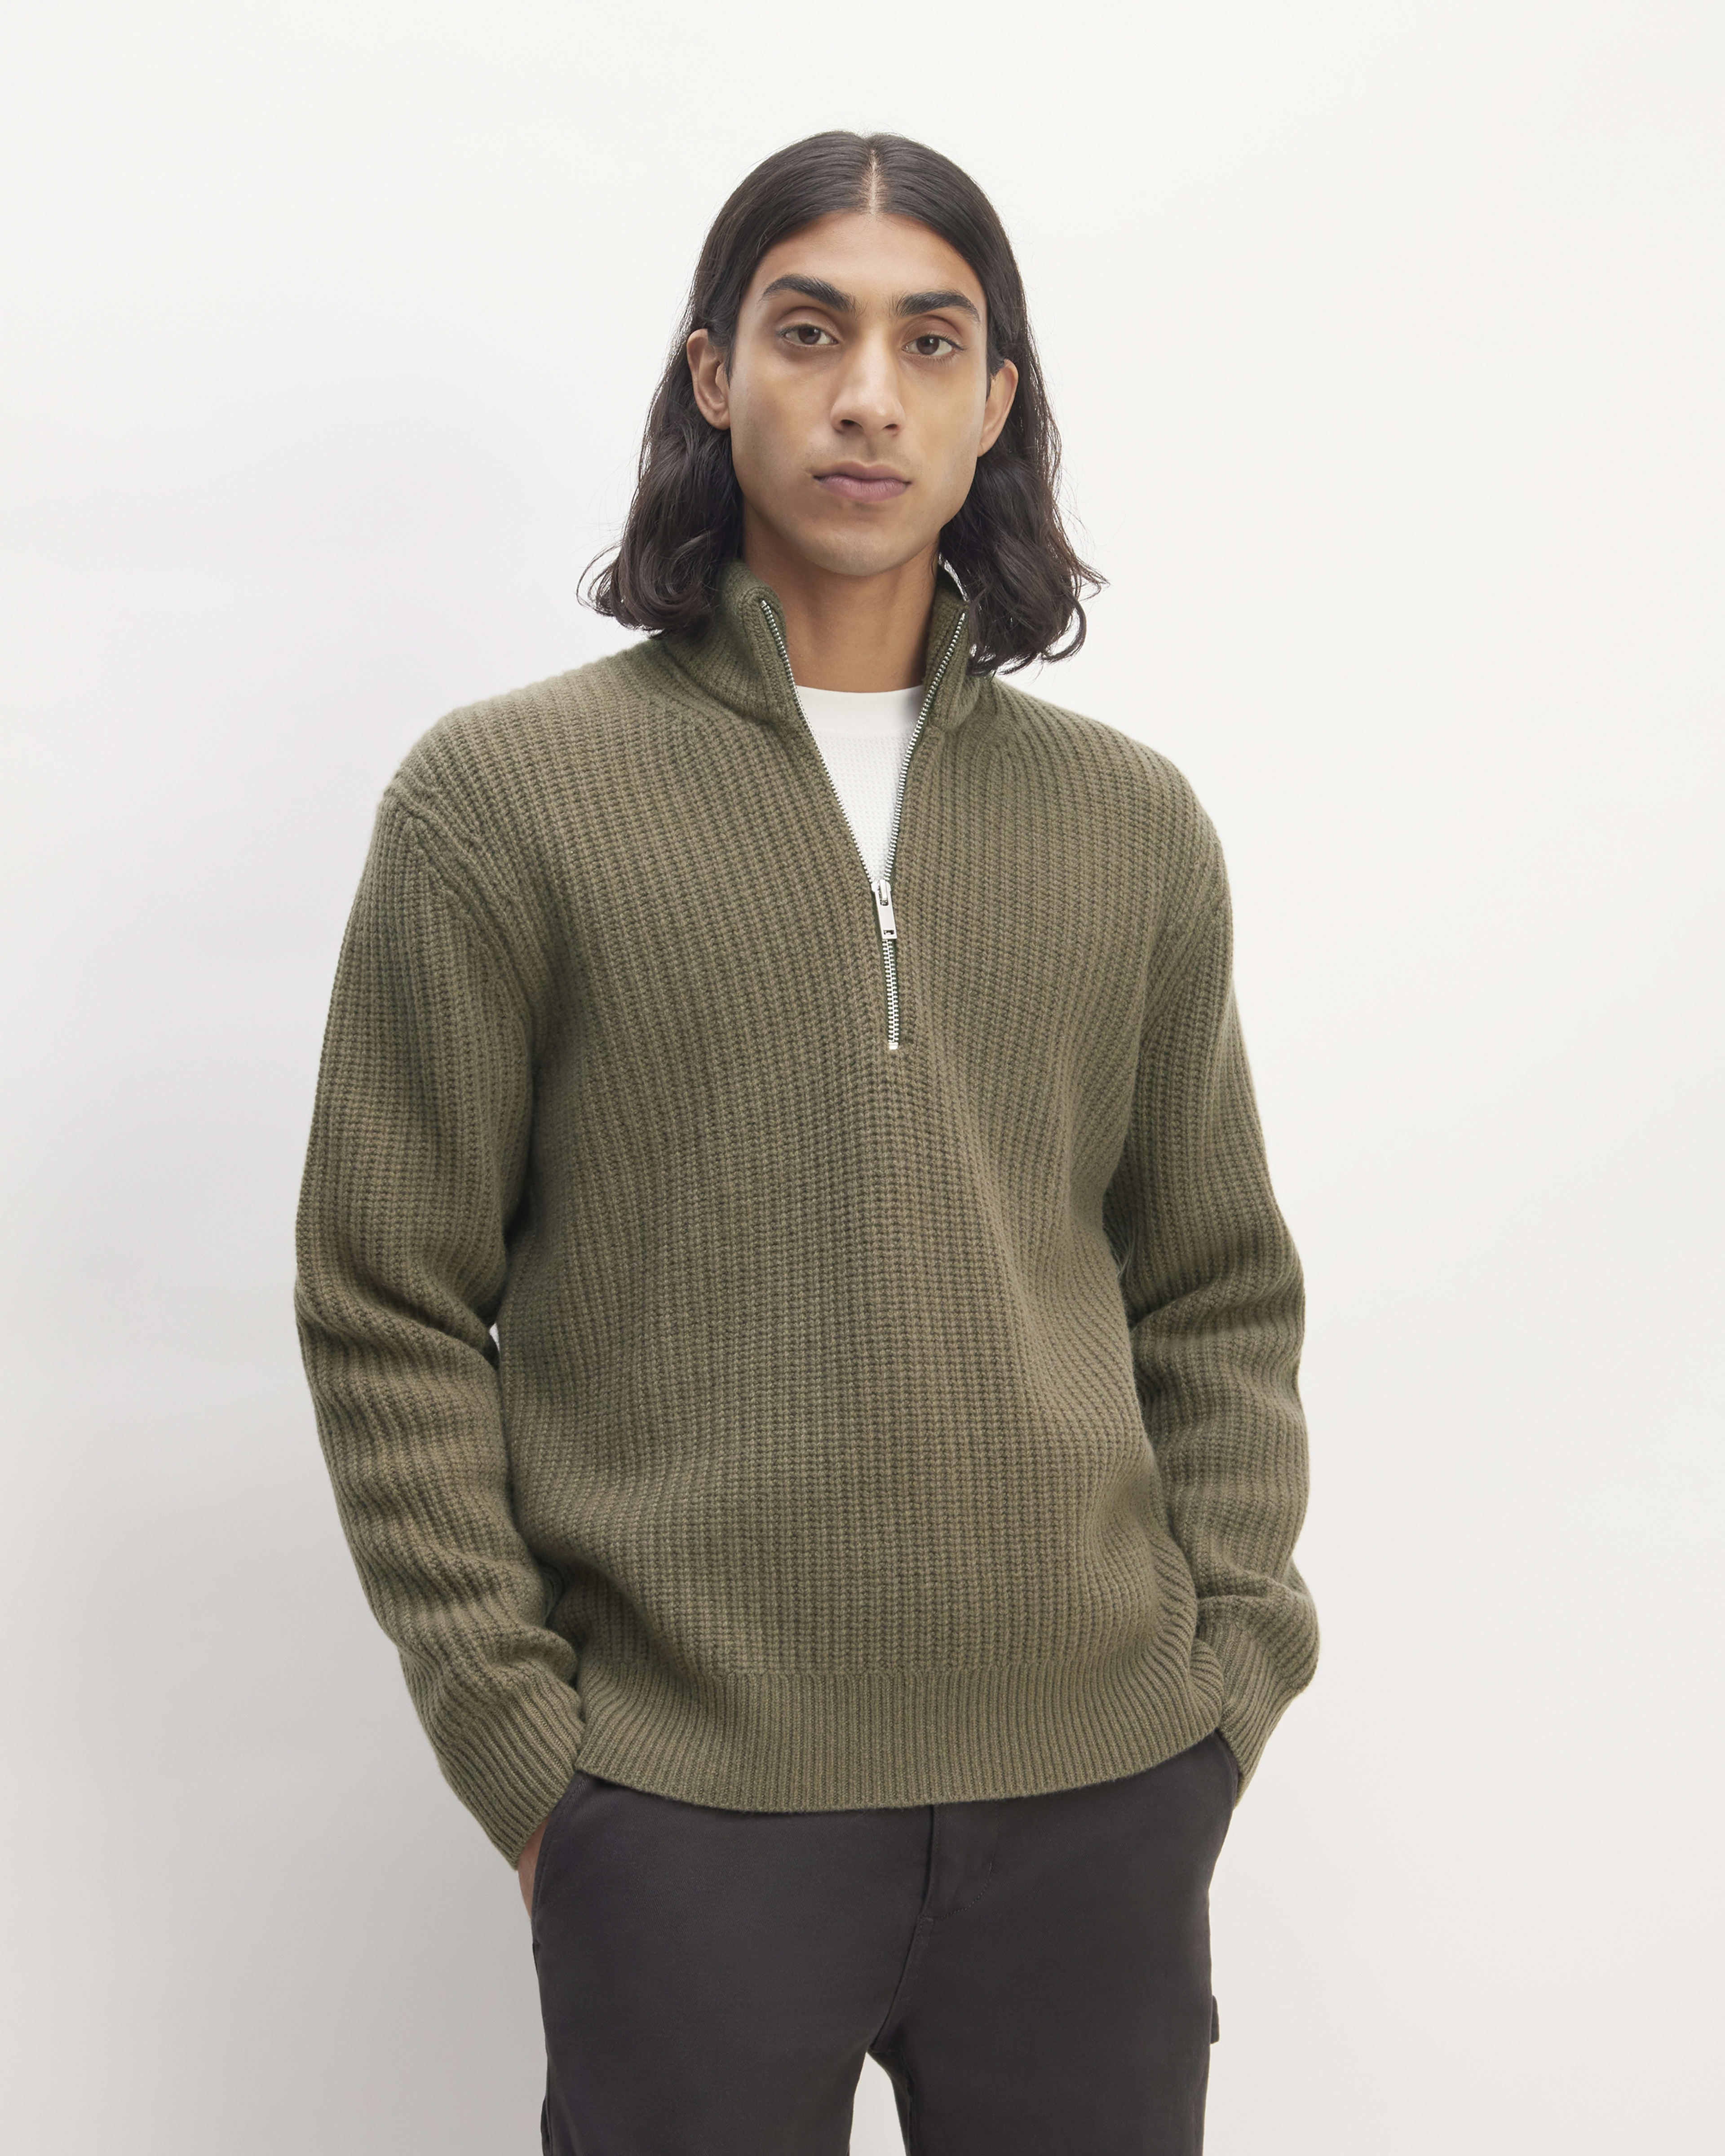 The Half-Zip Sweater, A Perfect Transitional Piece for Men